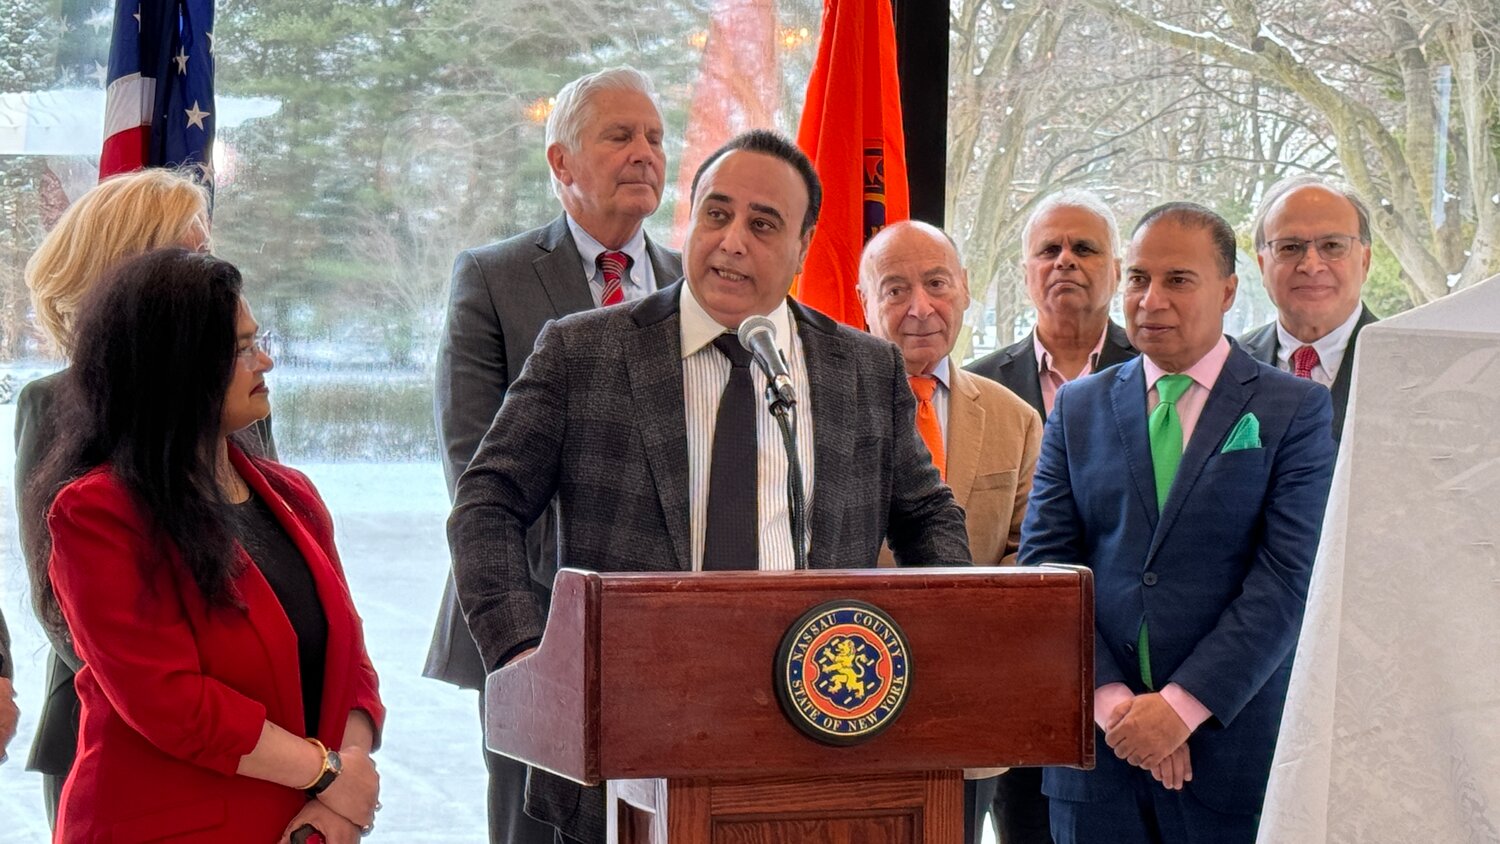 Harry Singh, the president and chief executive of Bolla Management Corp. convenience store chain serves as chair of the local host committee in Nassau County for the T20 Cricket World Cup tournament planned for June in Eisenhower Park.